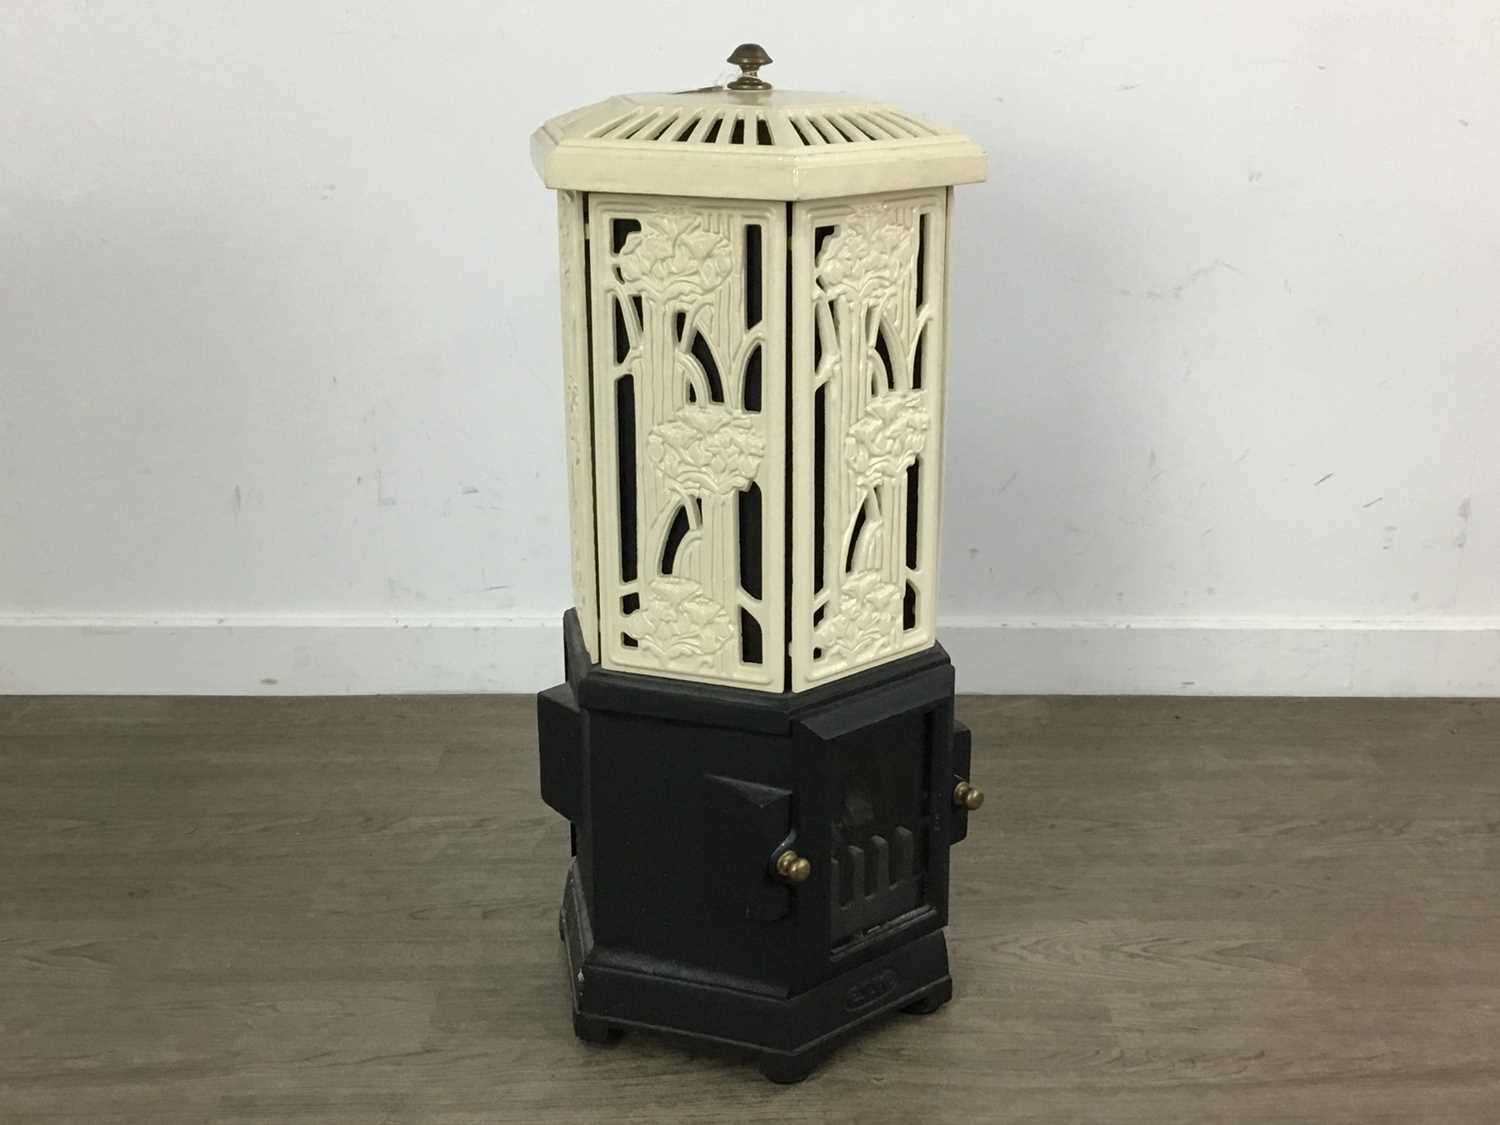 Lot 397 - MODERN SOLO ELECTRIC STOVE